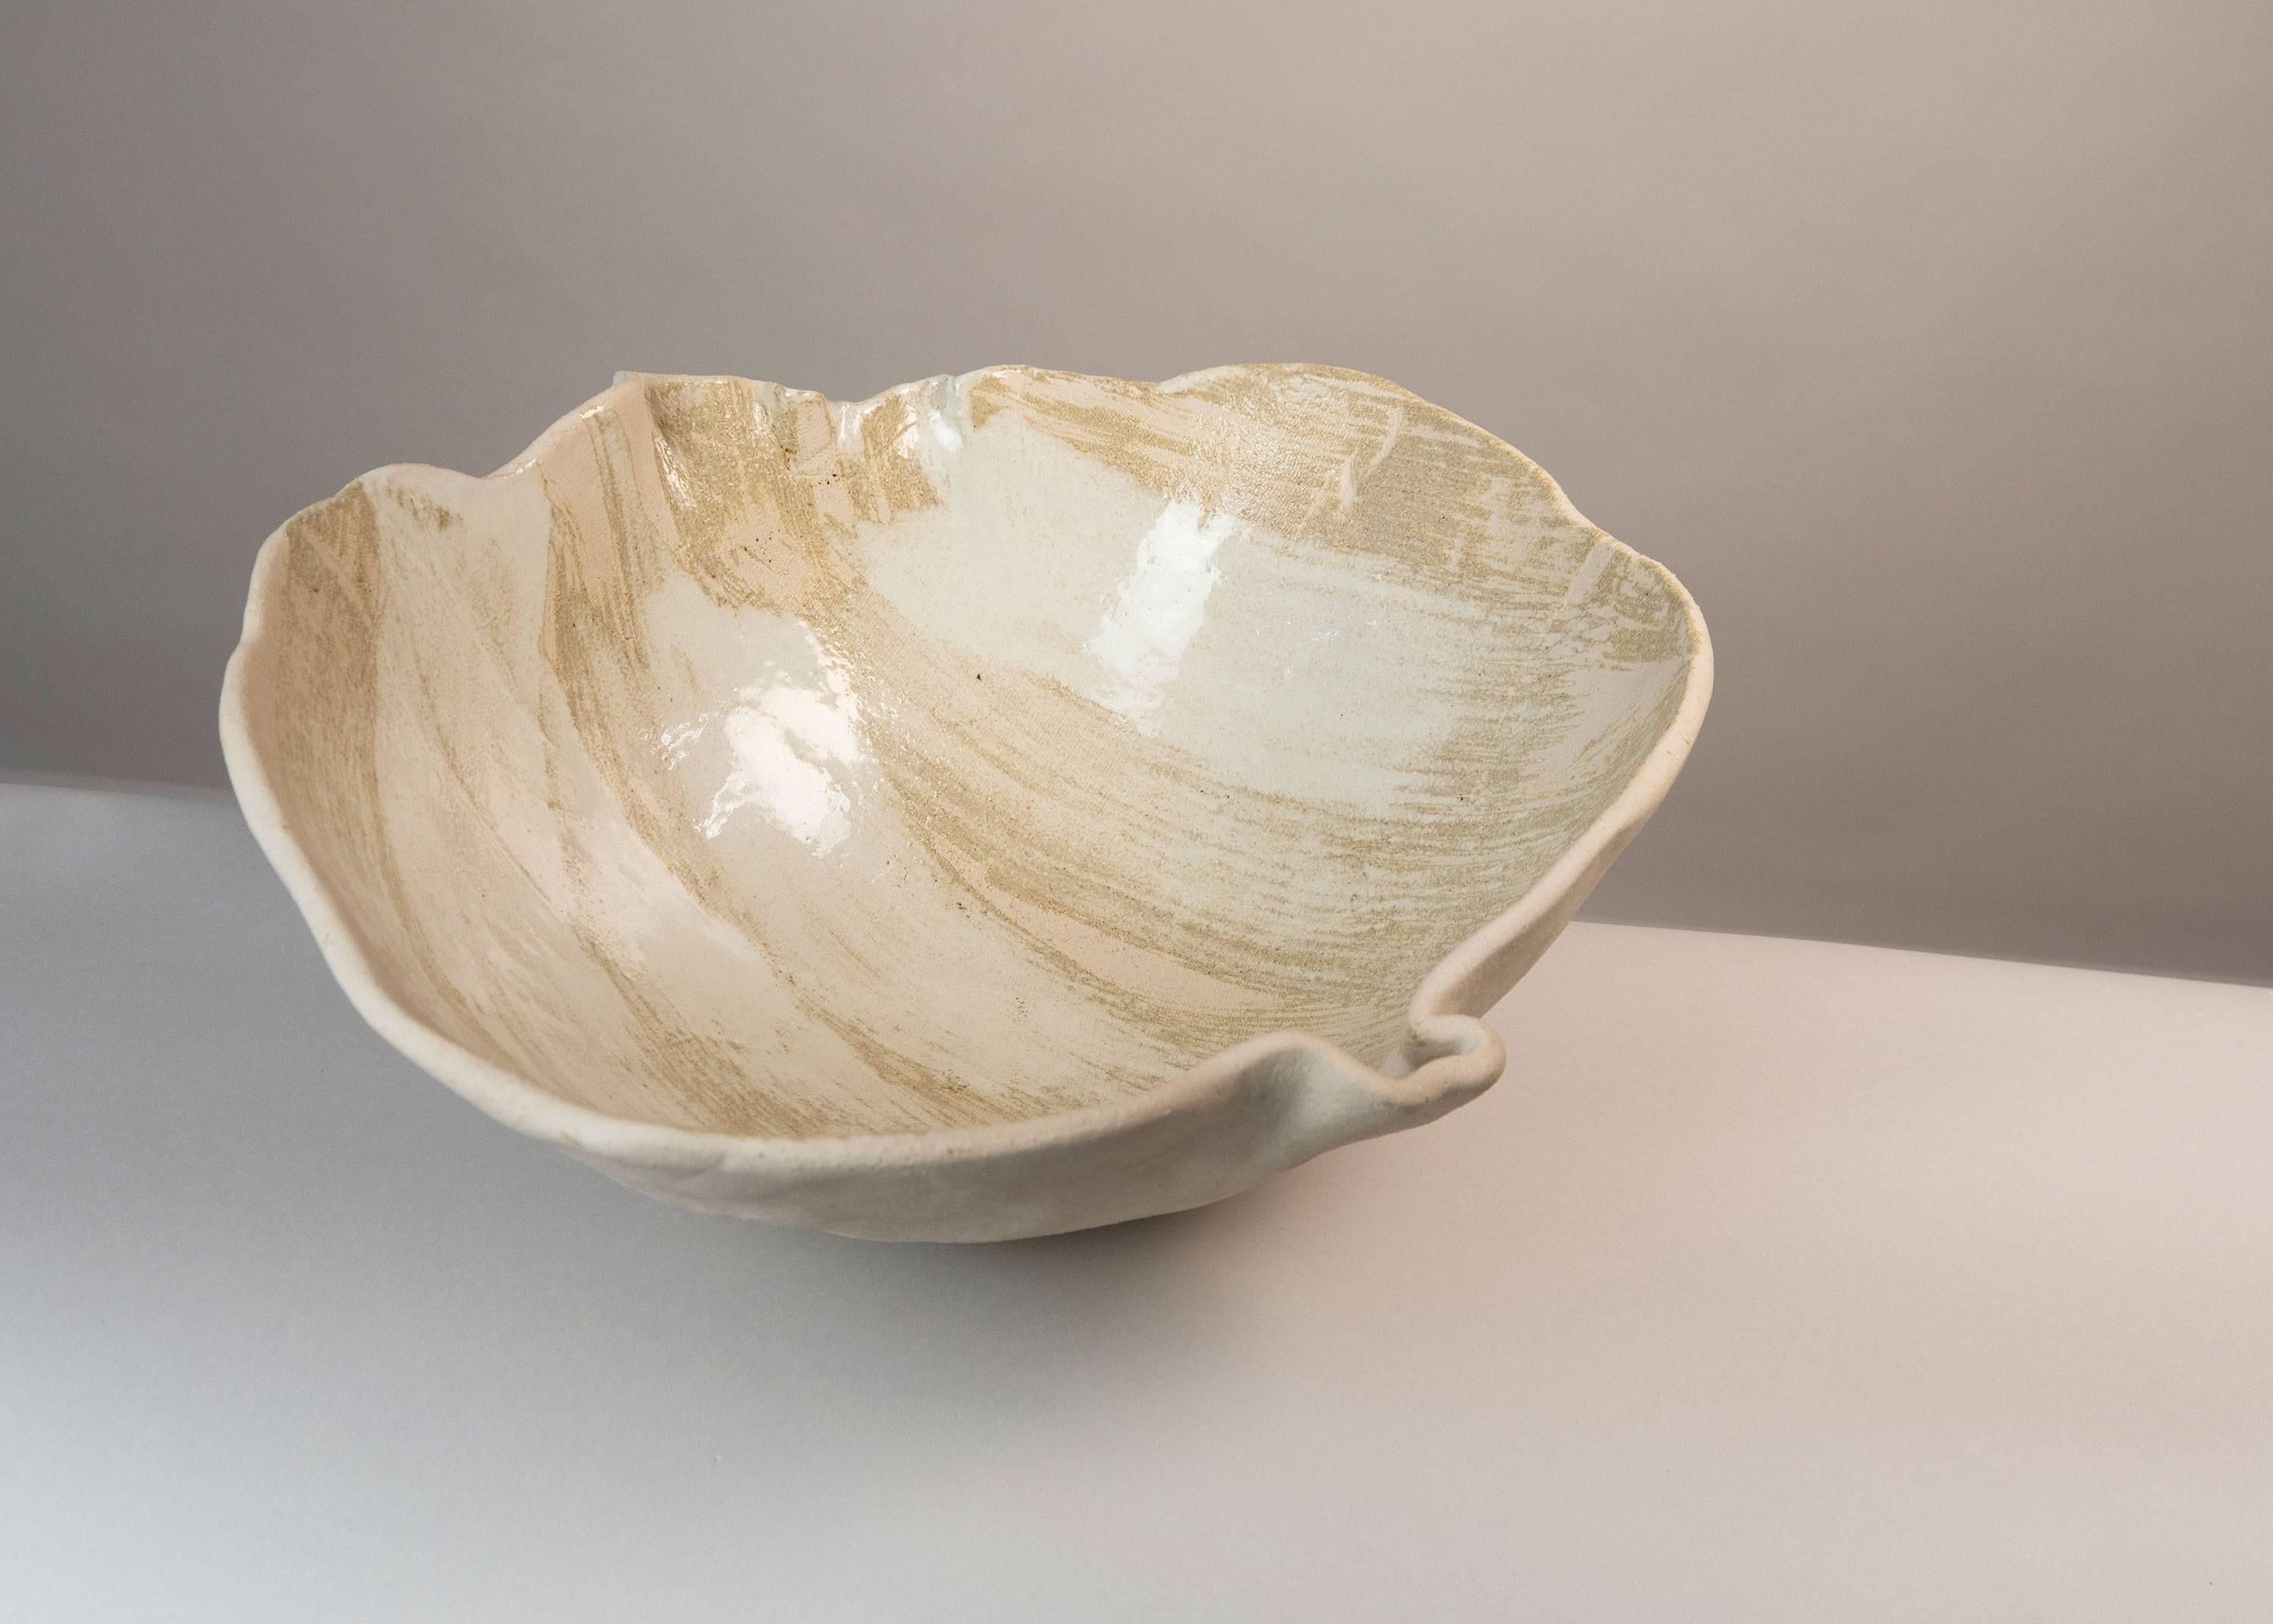 This unique ceramic centrepiece is made of Bavarian Porcelain. Exceptionally it contains Chamotte which gives it both the rough to the touch areas, like sand, as well a the soft smooth and fresh aspect.

With this piece the artist continues her